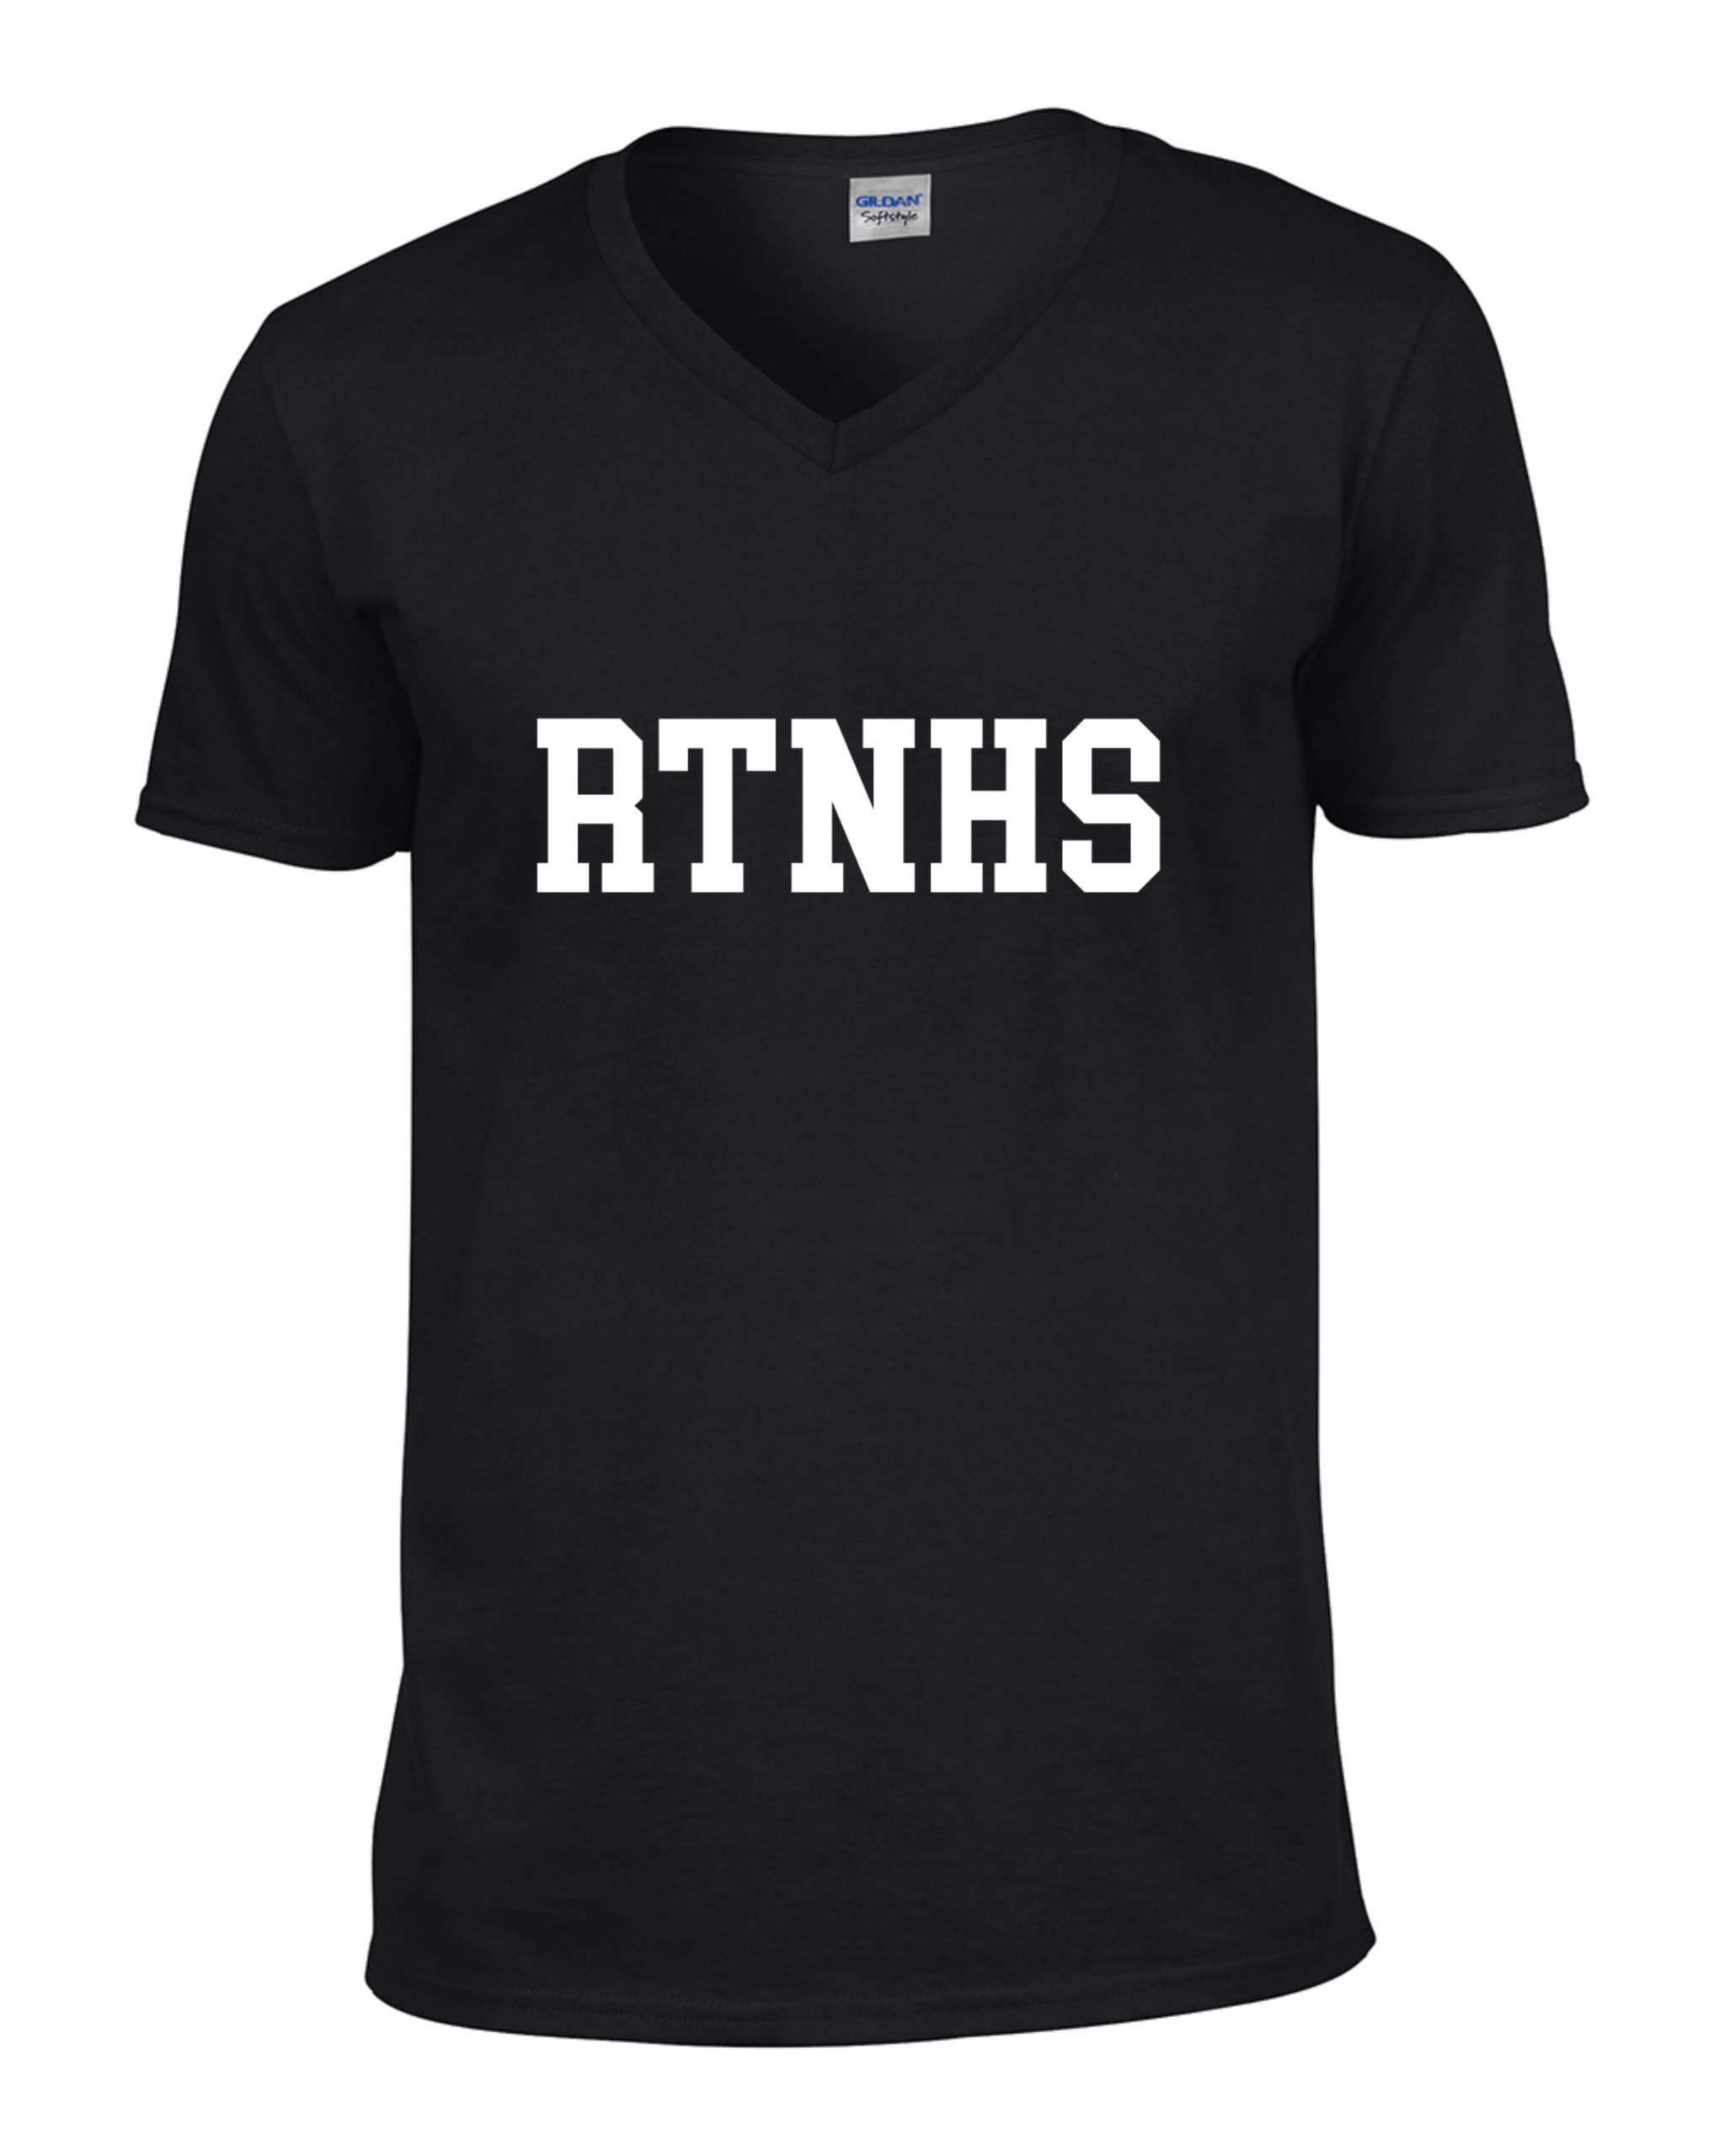 Rteenhs Tee For Led Tv